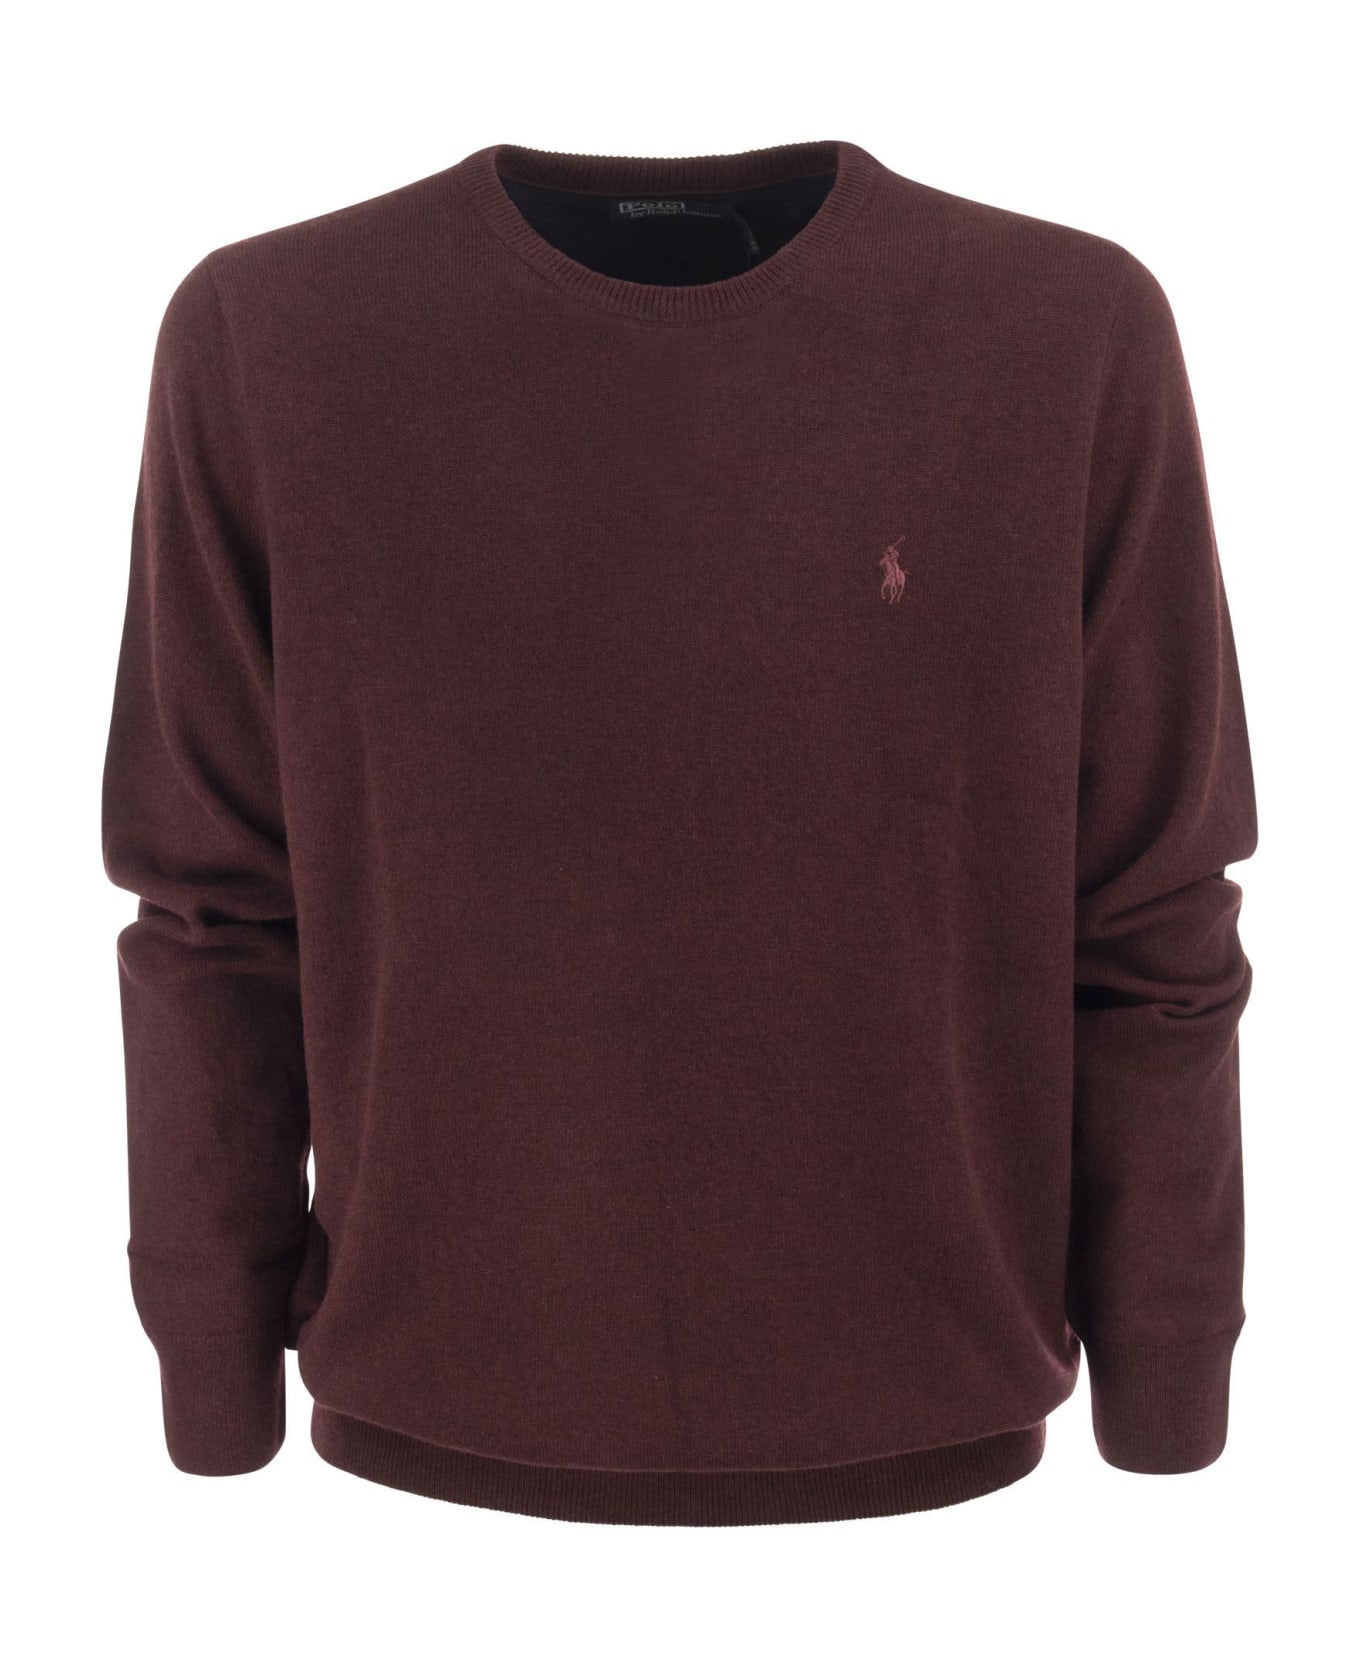 Polo Ralph Lauren Pony Embroidered Knit Jumper - Red